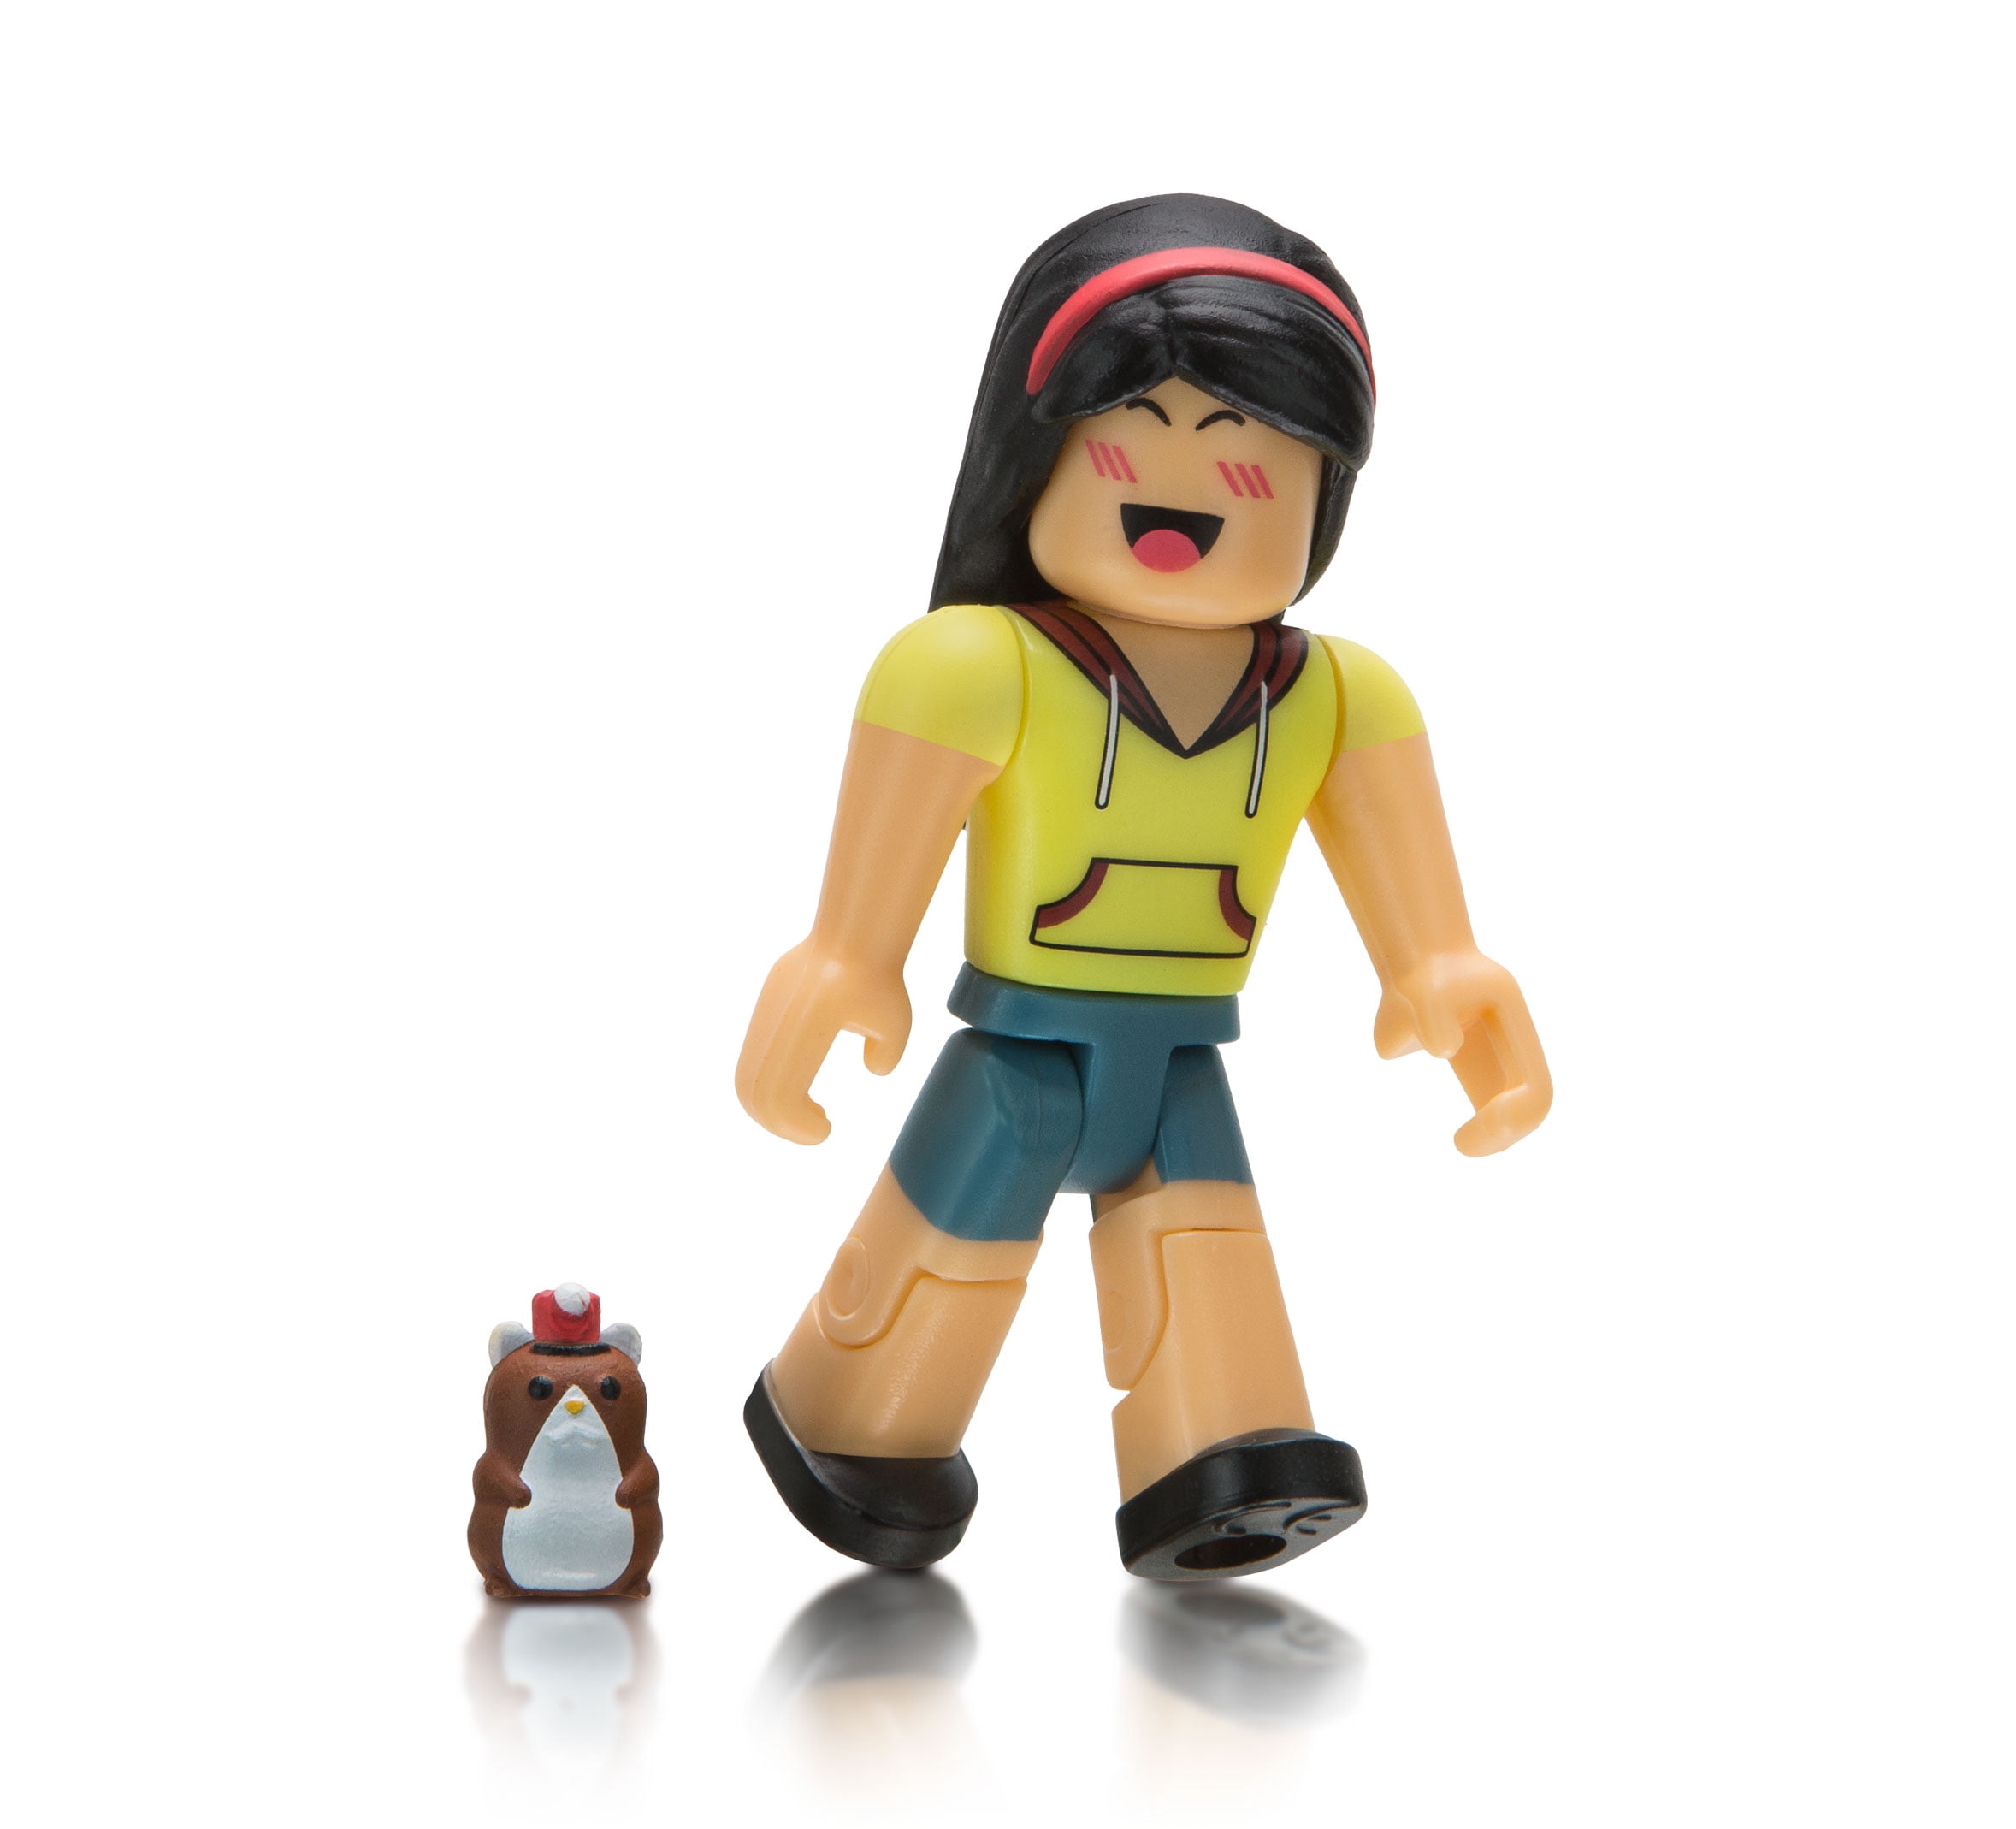 Roblox Celebrity Collection Series 1 Mystery Figure Includes 1 Figure Exclusive Virtual Item Walmart Com Walmart Com - action figures roblox celebrity mystery figure series 1 assortment